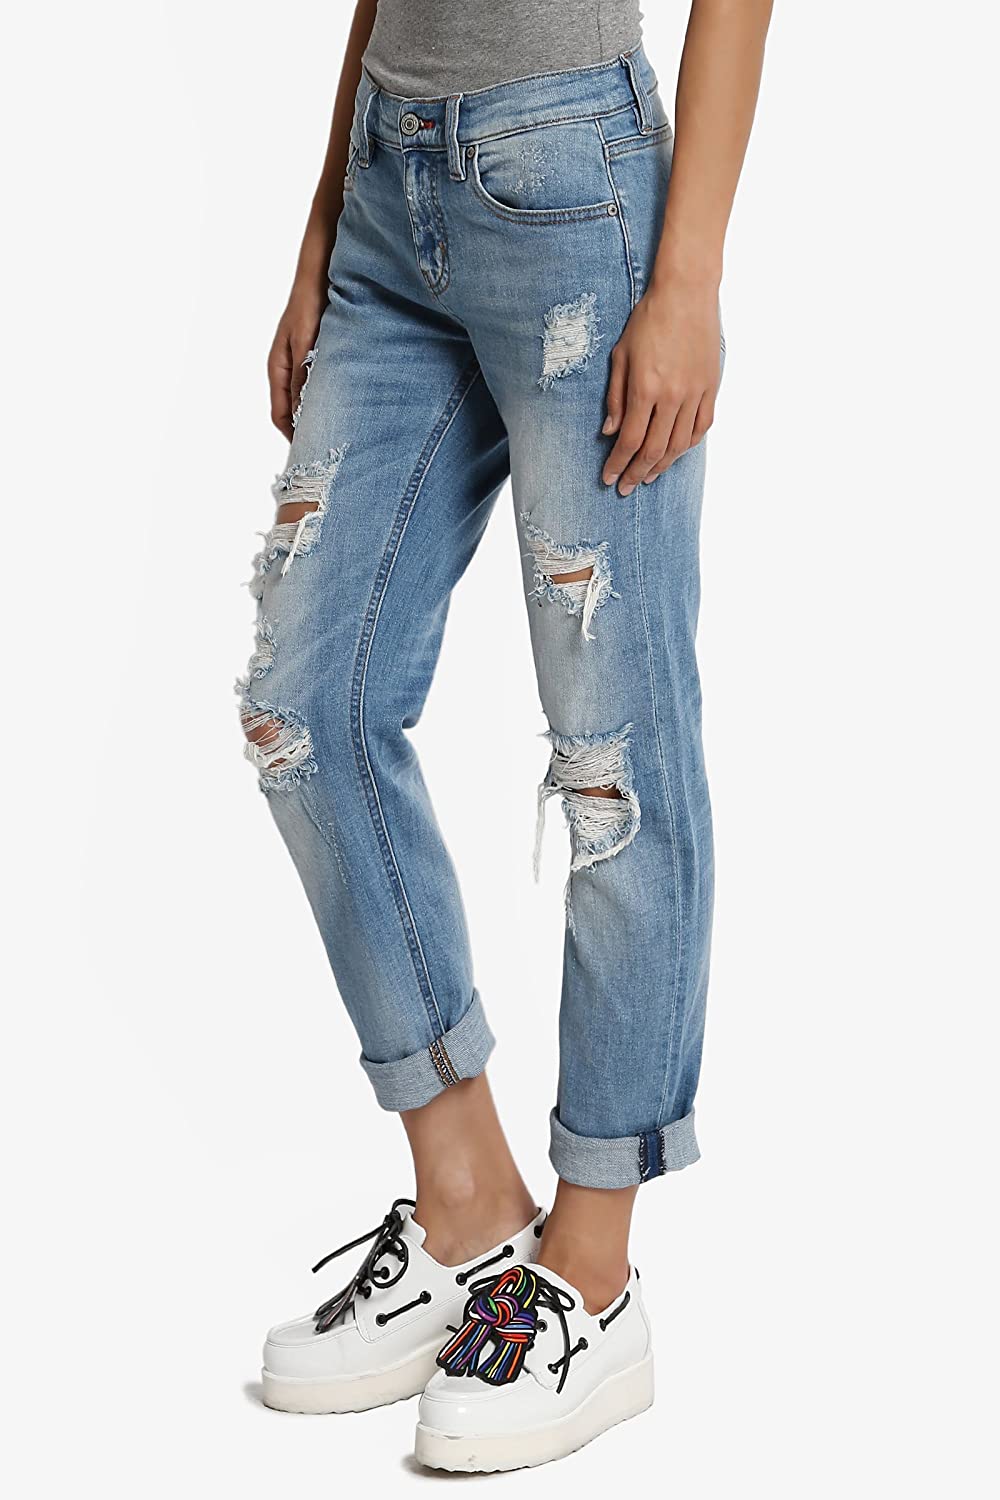 TheMogan Distressed Destructed Washed Denim Mid Rise Relaxed Boyfriend Jeans